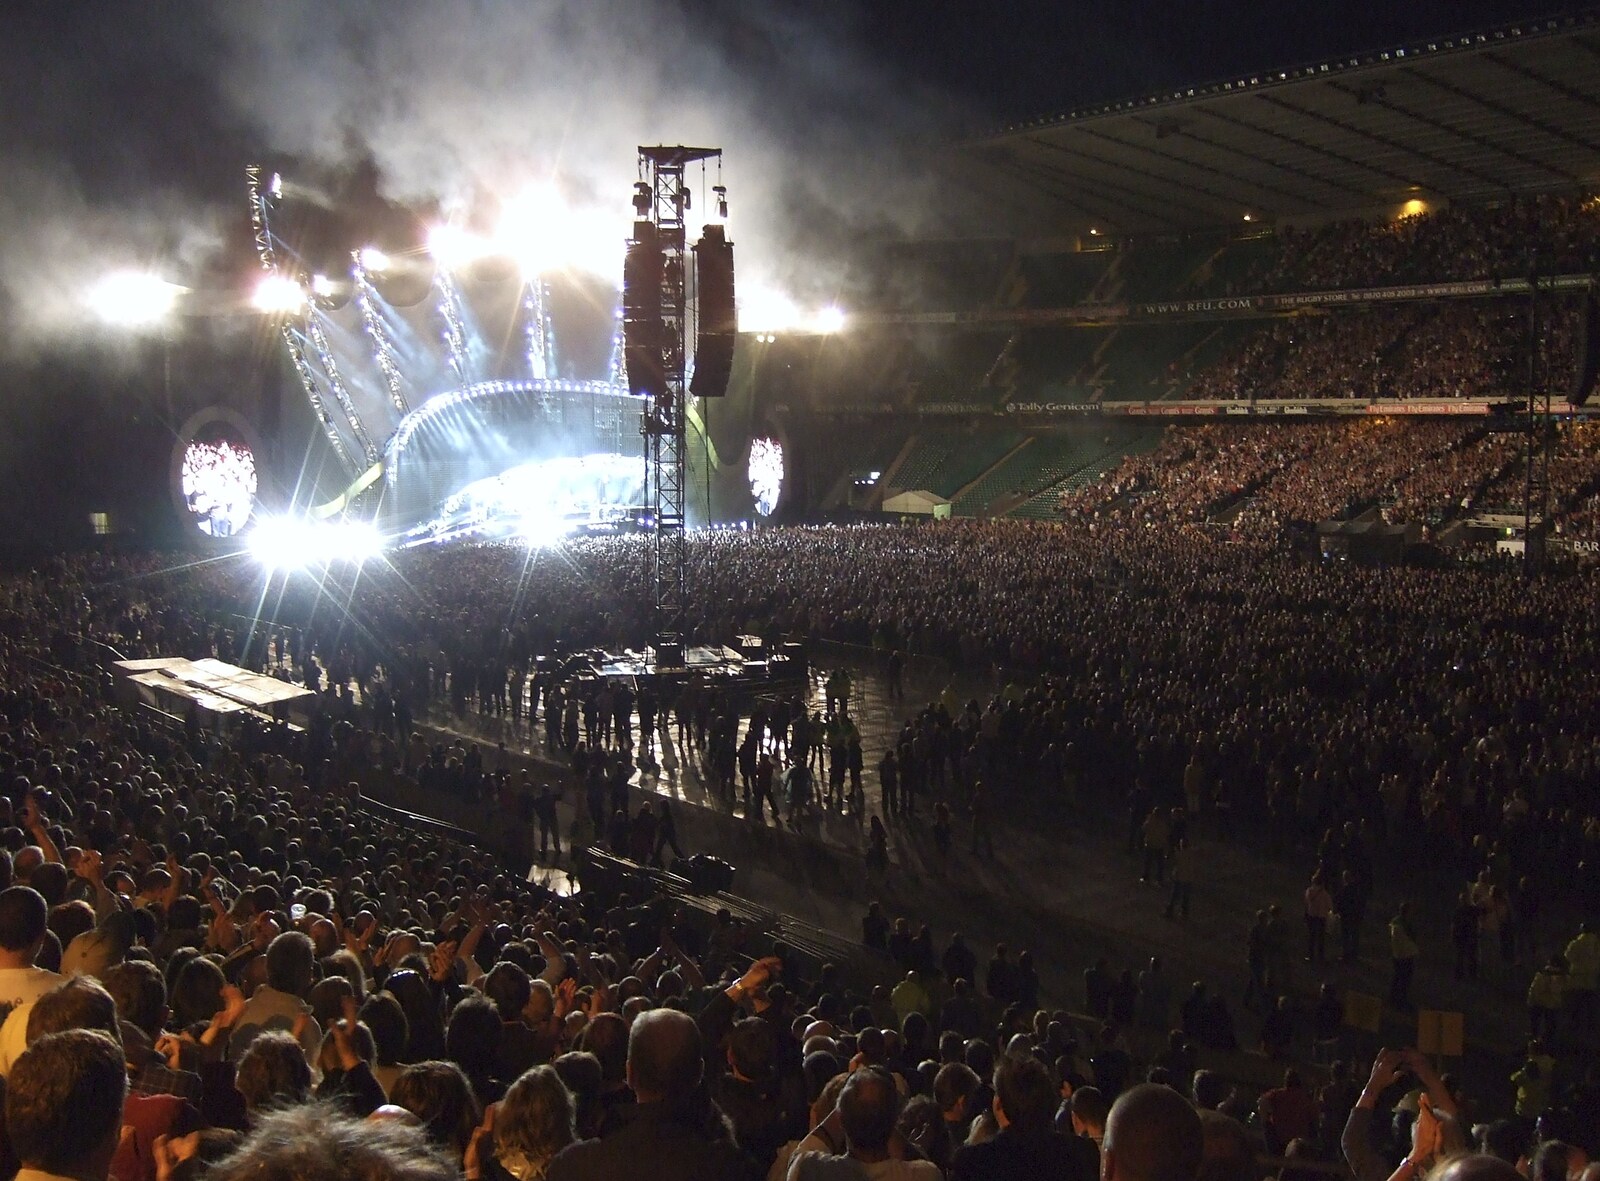 Genesis Live at Twickenham, and Music on Parker's Piece, London and Cambridge - 8th July 2007: The stadium fills with smoke and light